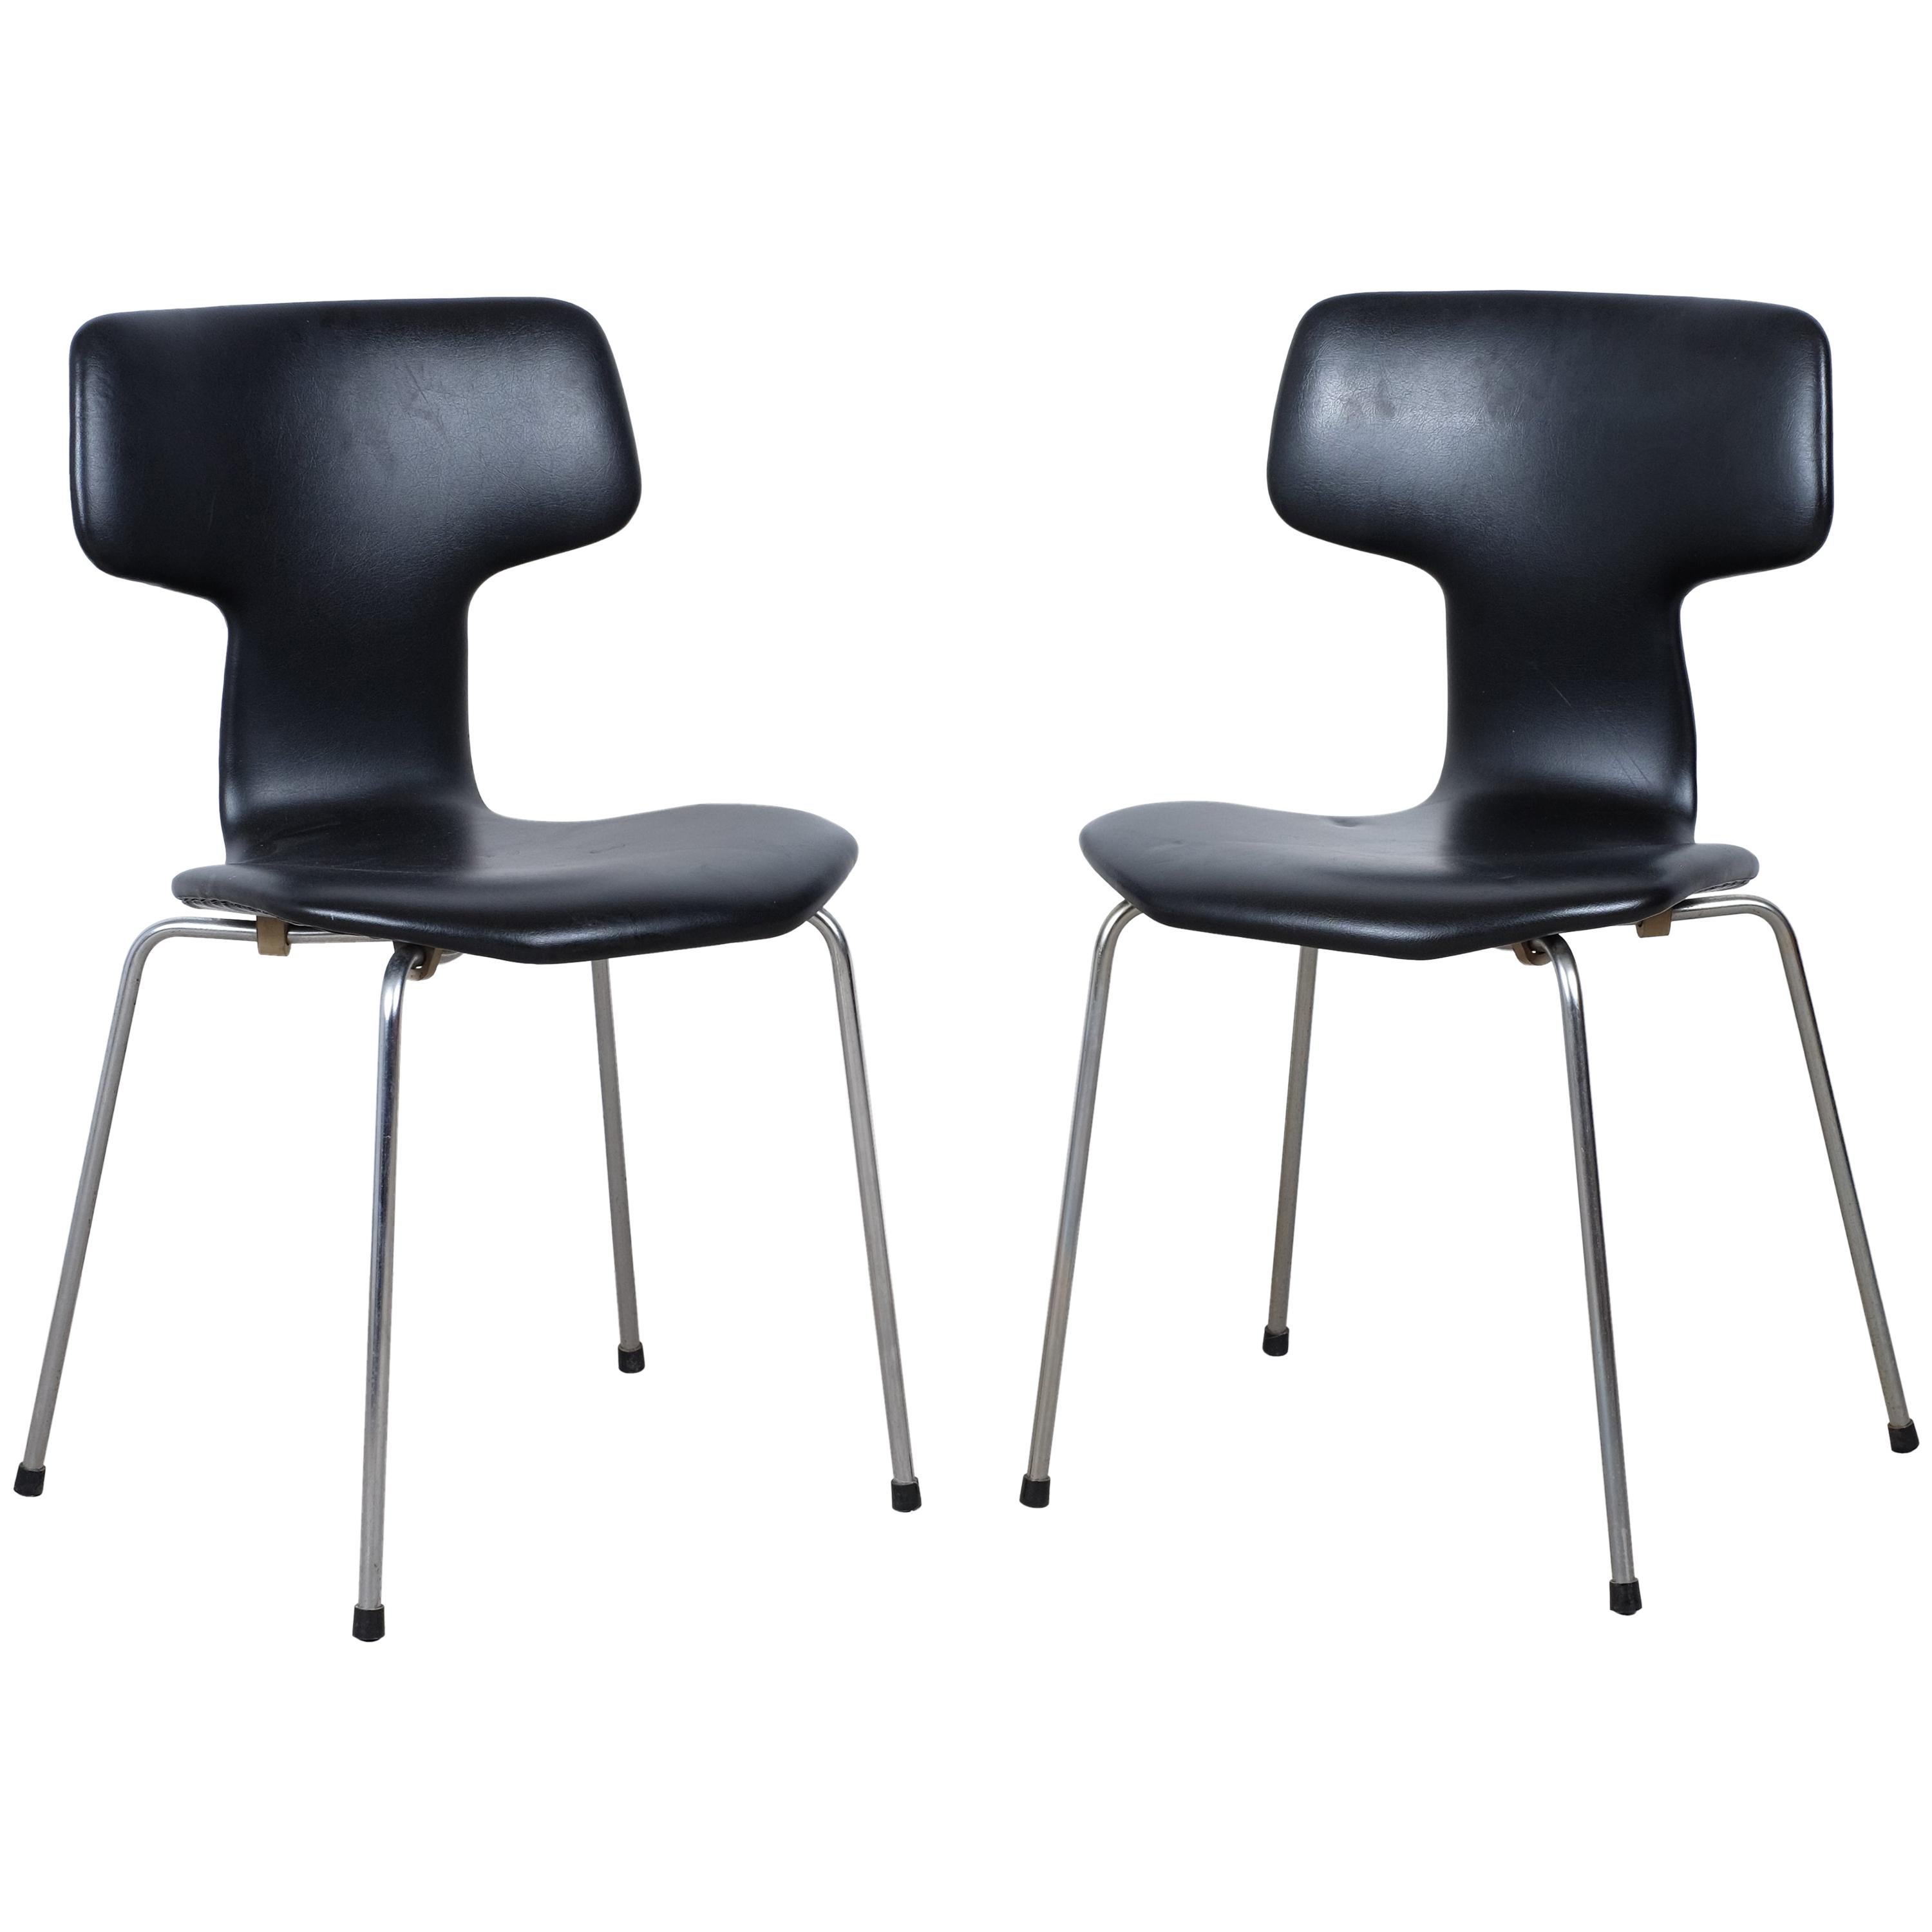 Pair of 'T-Chairs' by Arne Jacobsen